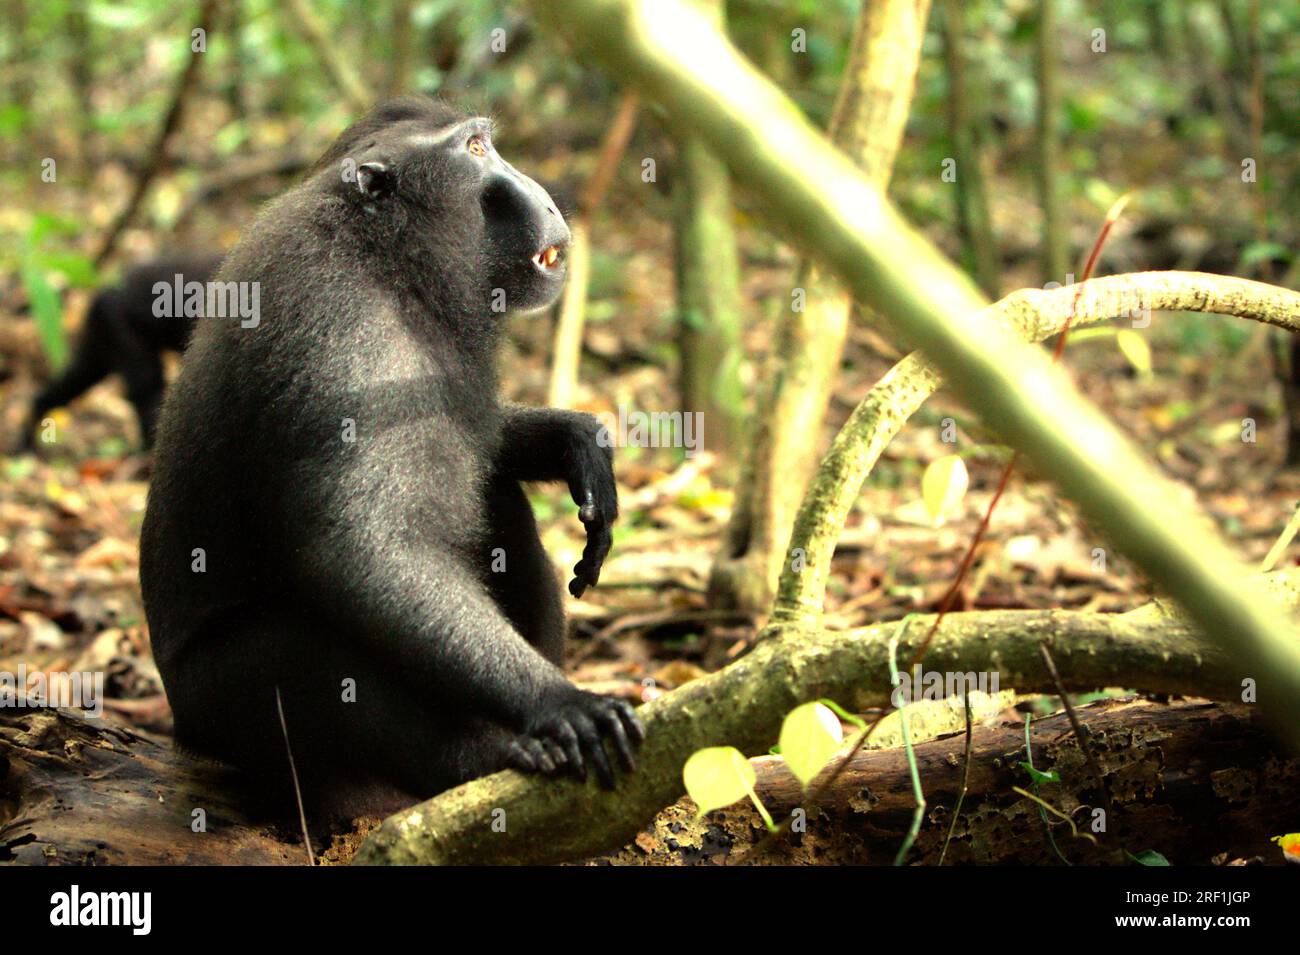 A Celebes crested macaque (Macaca nigra) looks up as it is sitting on forest floor in Tangkoko Batuangus Nature Reserve, North Sulawesi, Indonesia. The temperature increased in Tangkoko forest, and the overall fruit abundance decreased, according to a team of scientists led by Marine Joly, as published on International Journal of Primatology in July 2023. 'Between 2012 and 2020, temperatures increased by up to 0.2 degree Celsius per year in the forest, and the overall fruit abundance decreased by 1 percent per year,” they wrote. Stock Photo